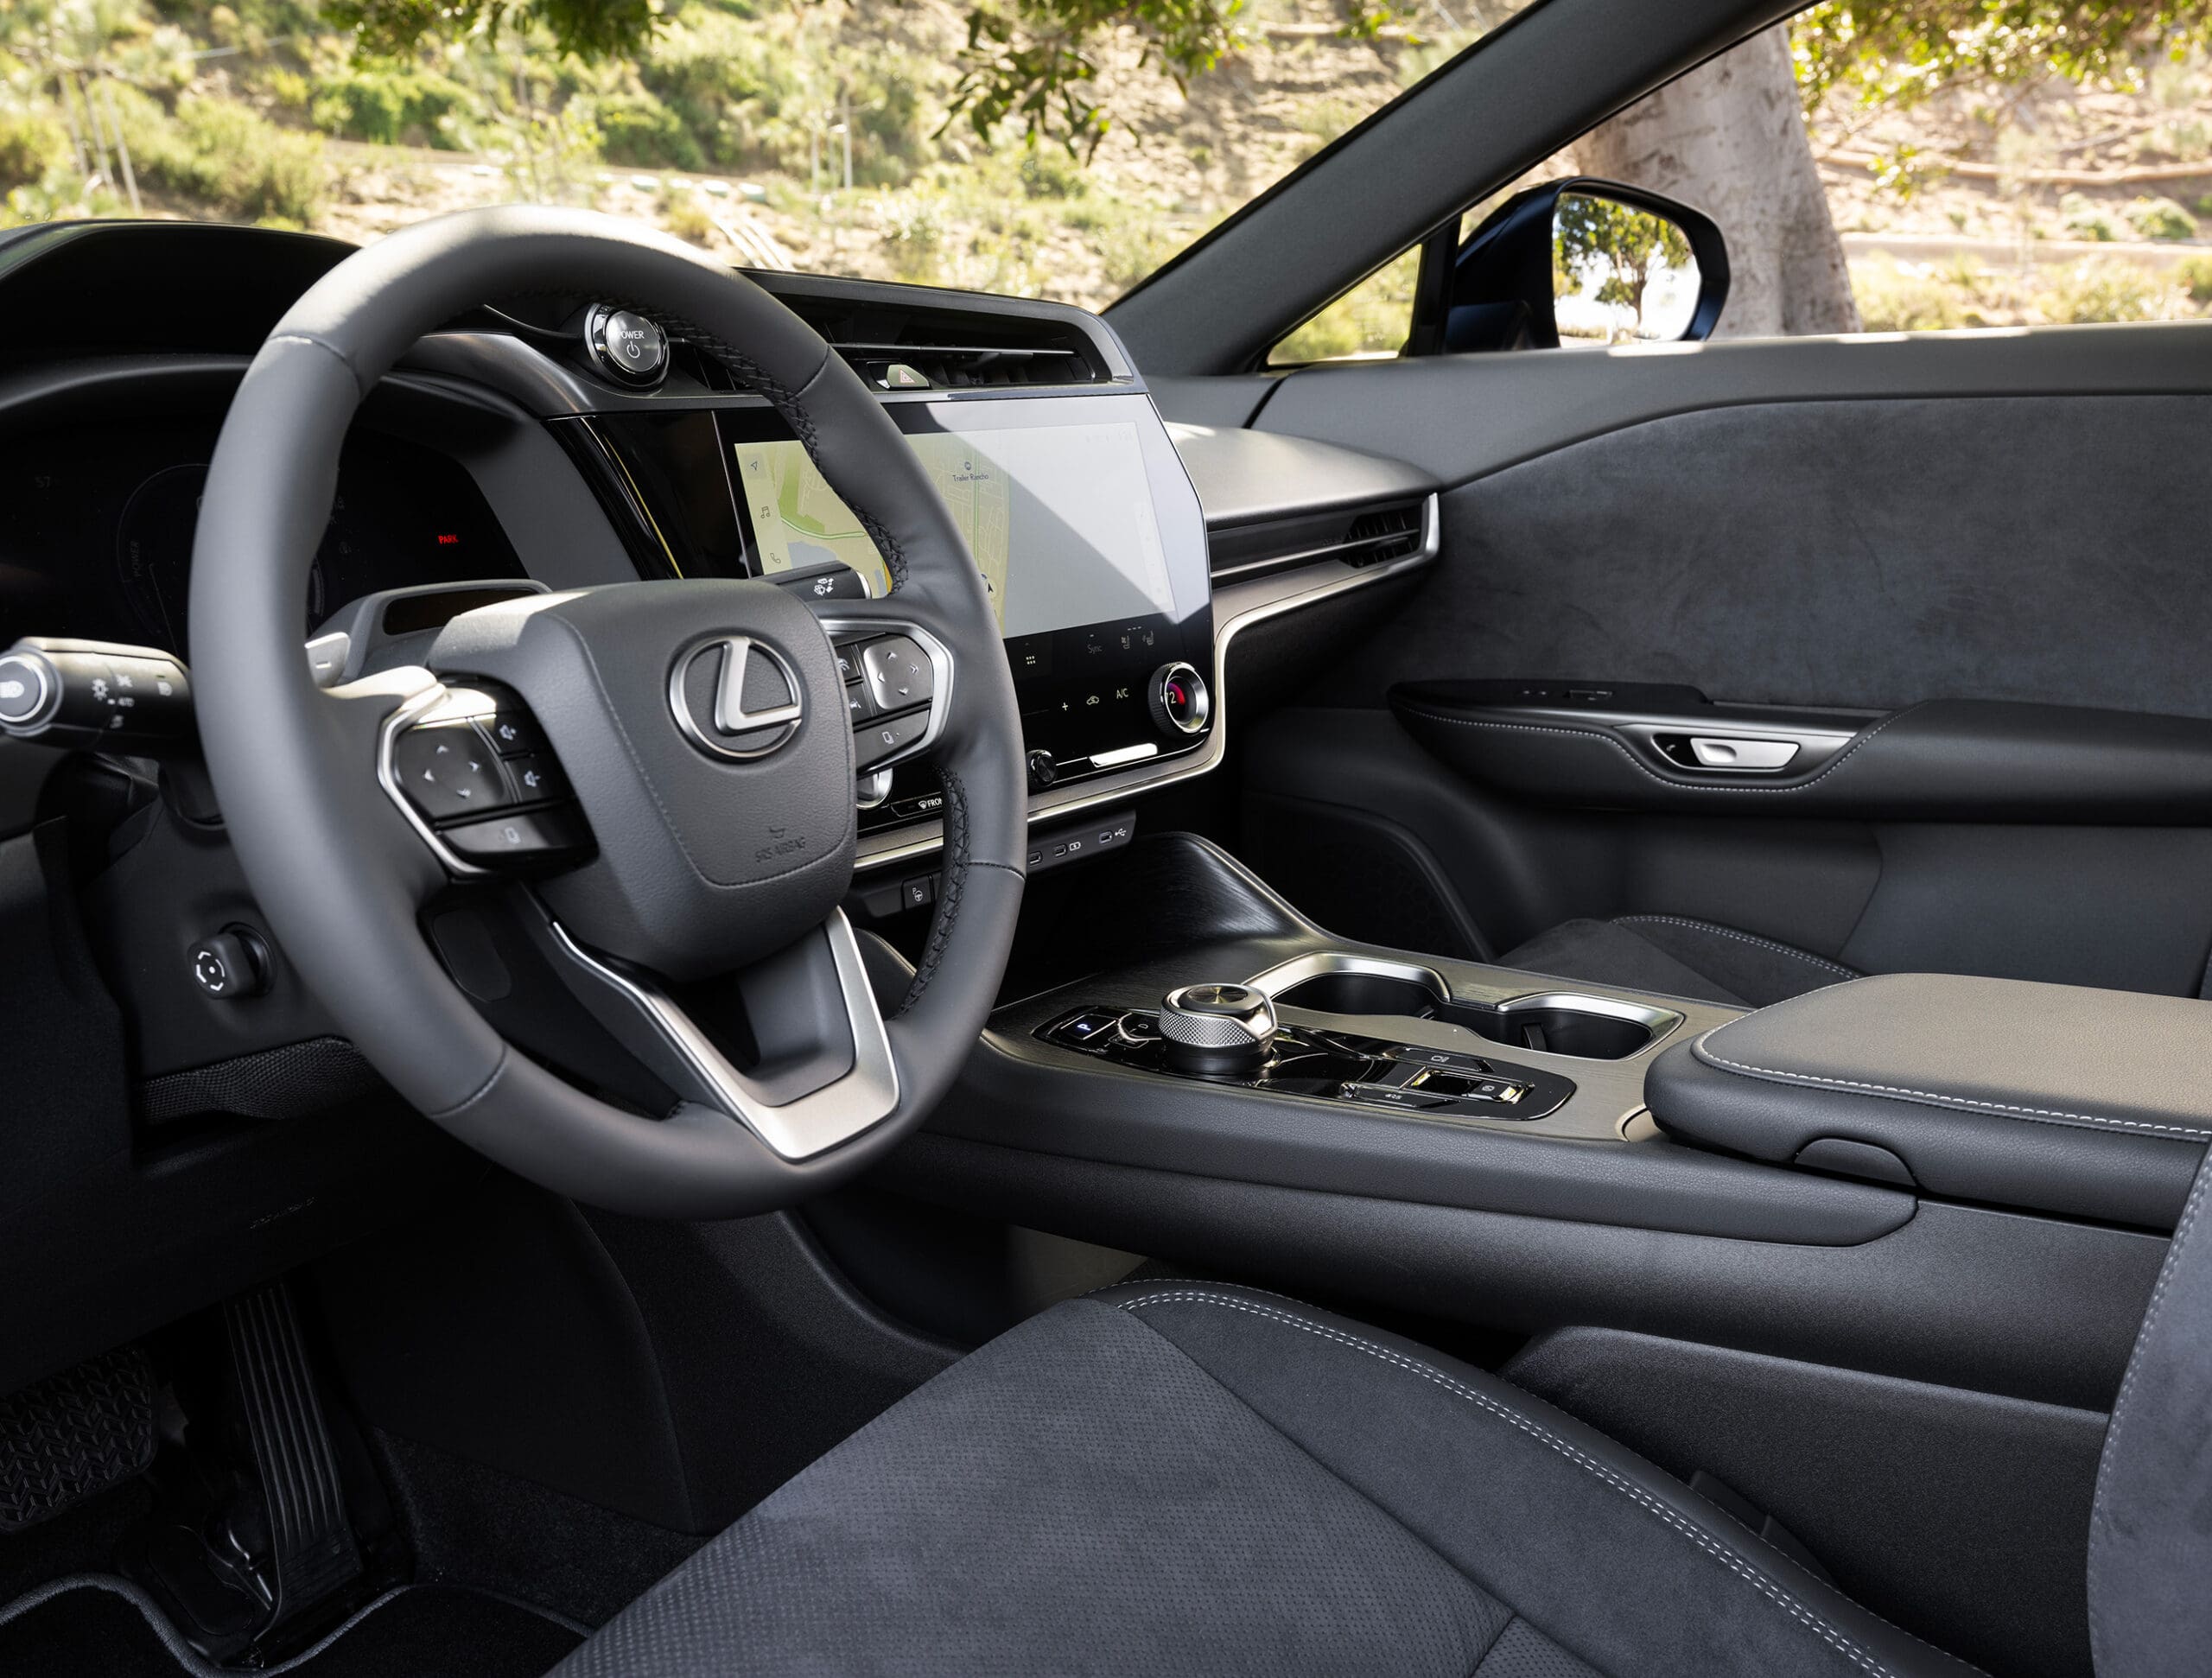 The black, gray, and silver interiors of the Lexus RZ